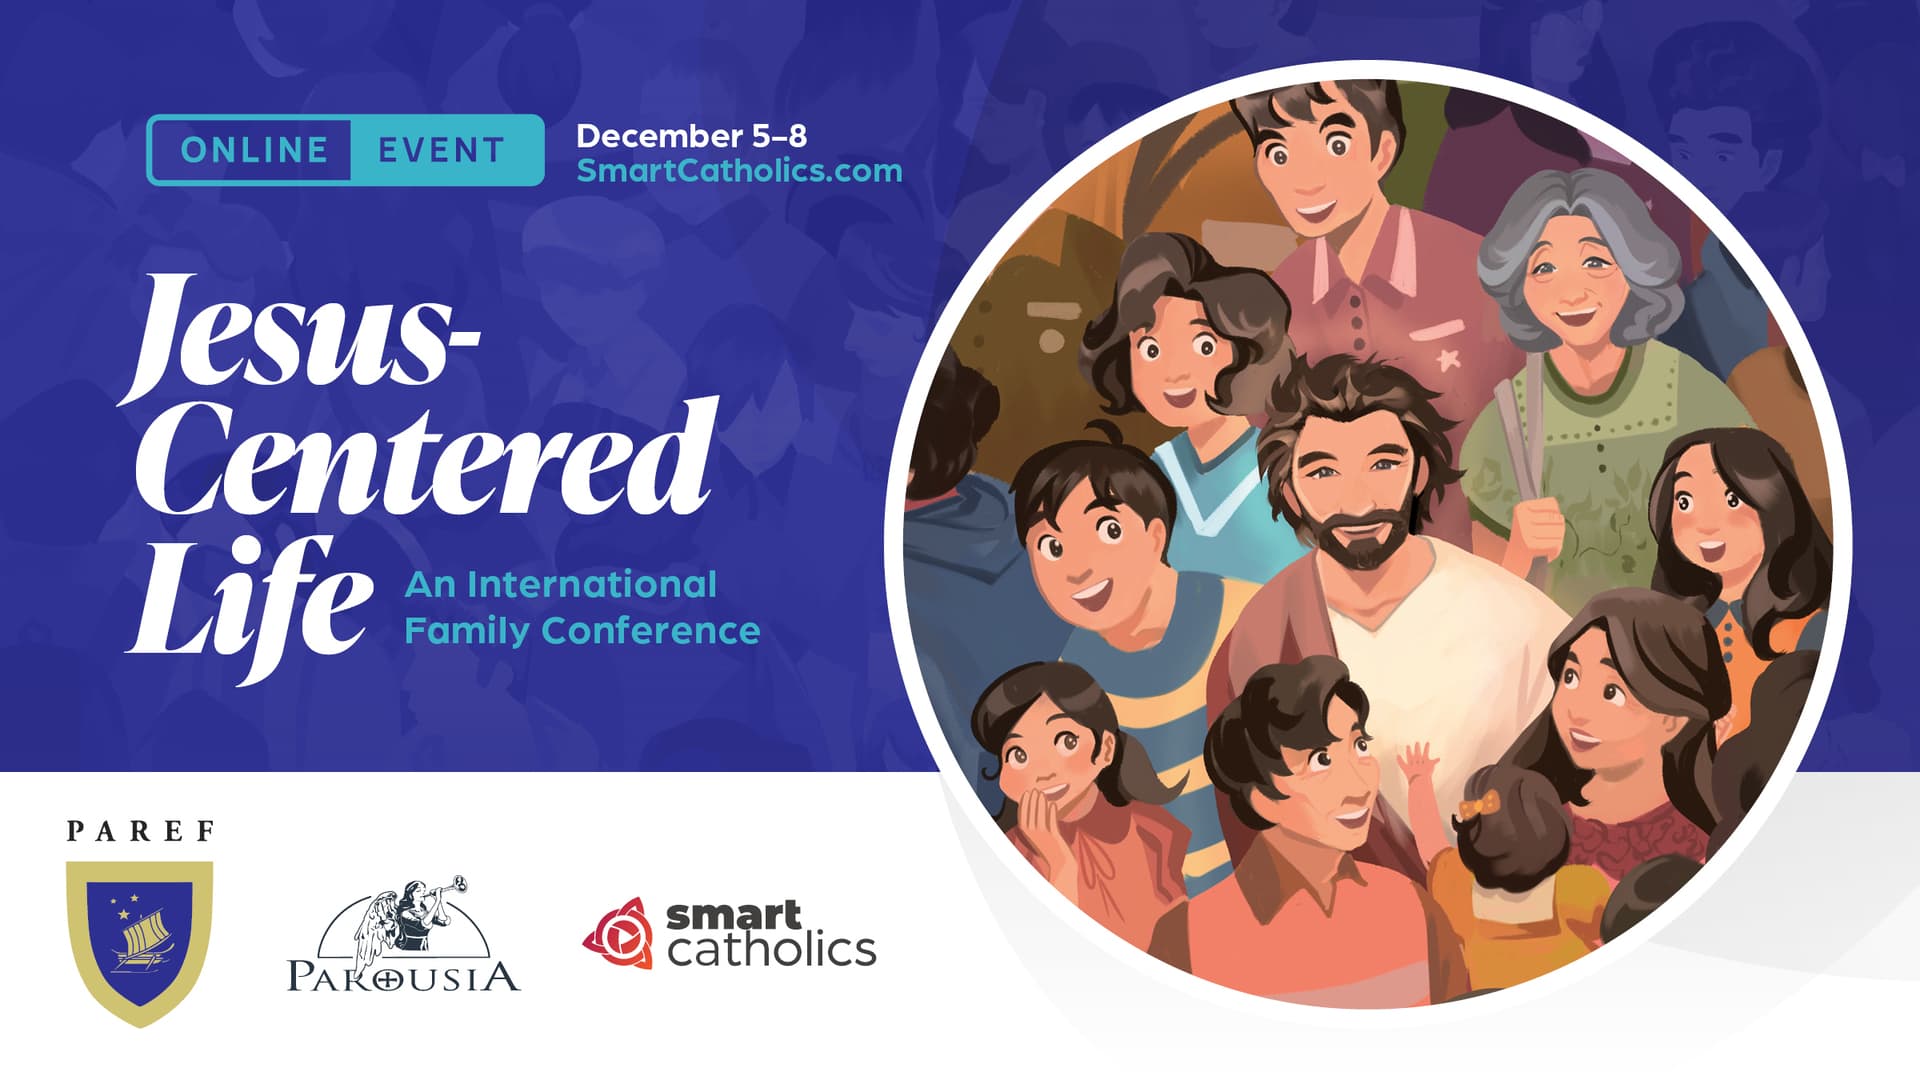 Jesus-Centered Life: An International Family Conference